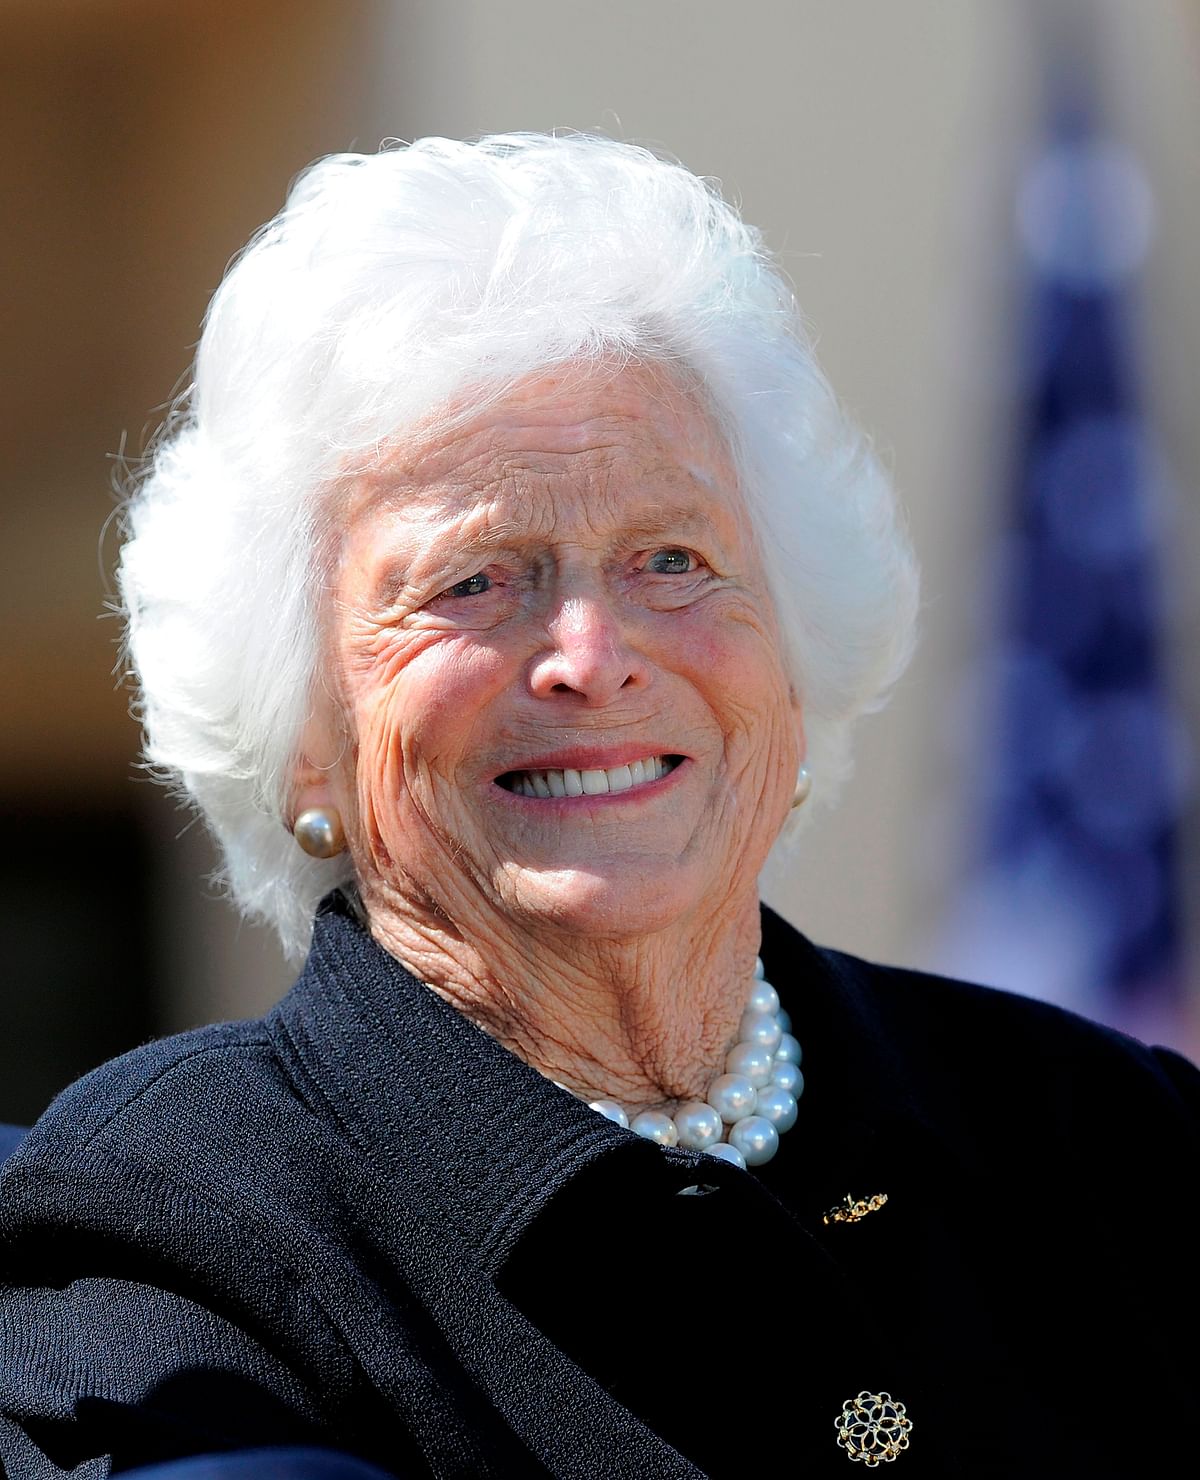 In this file photo taken on 25 April, 2013, former US First Lady Barbara Bush smiles during the George W Bush Presidential Center dedication ceremony in Dallas, Texas. Photo: AFP